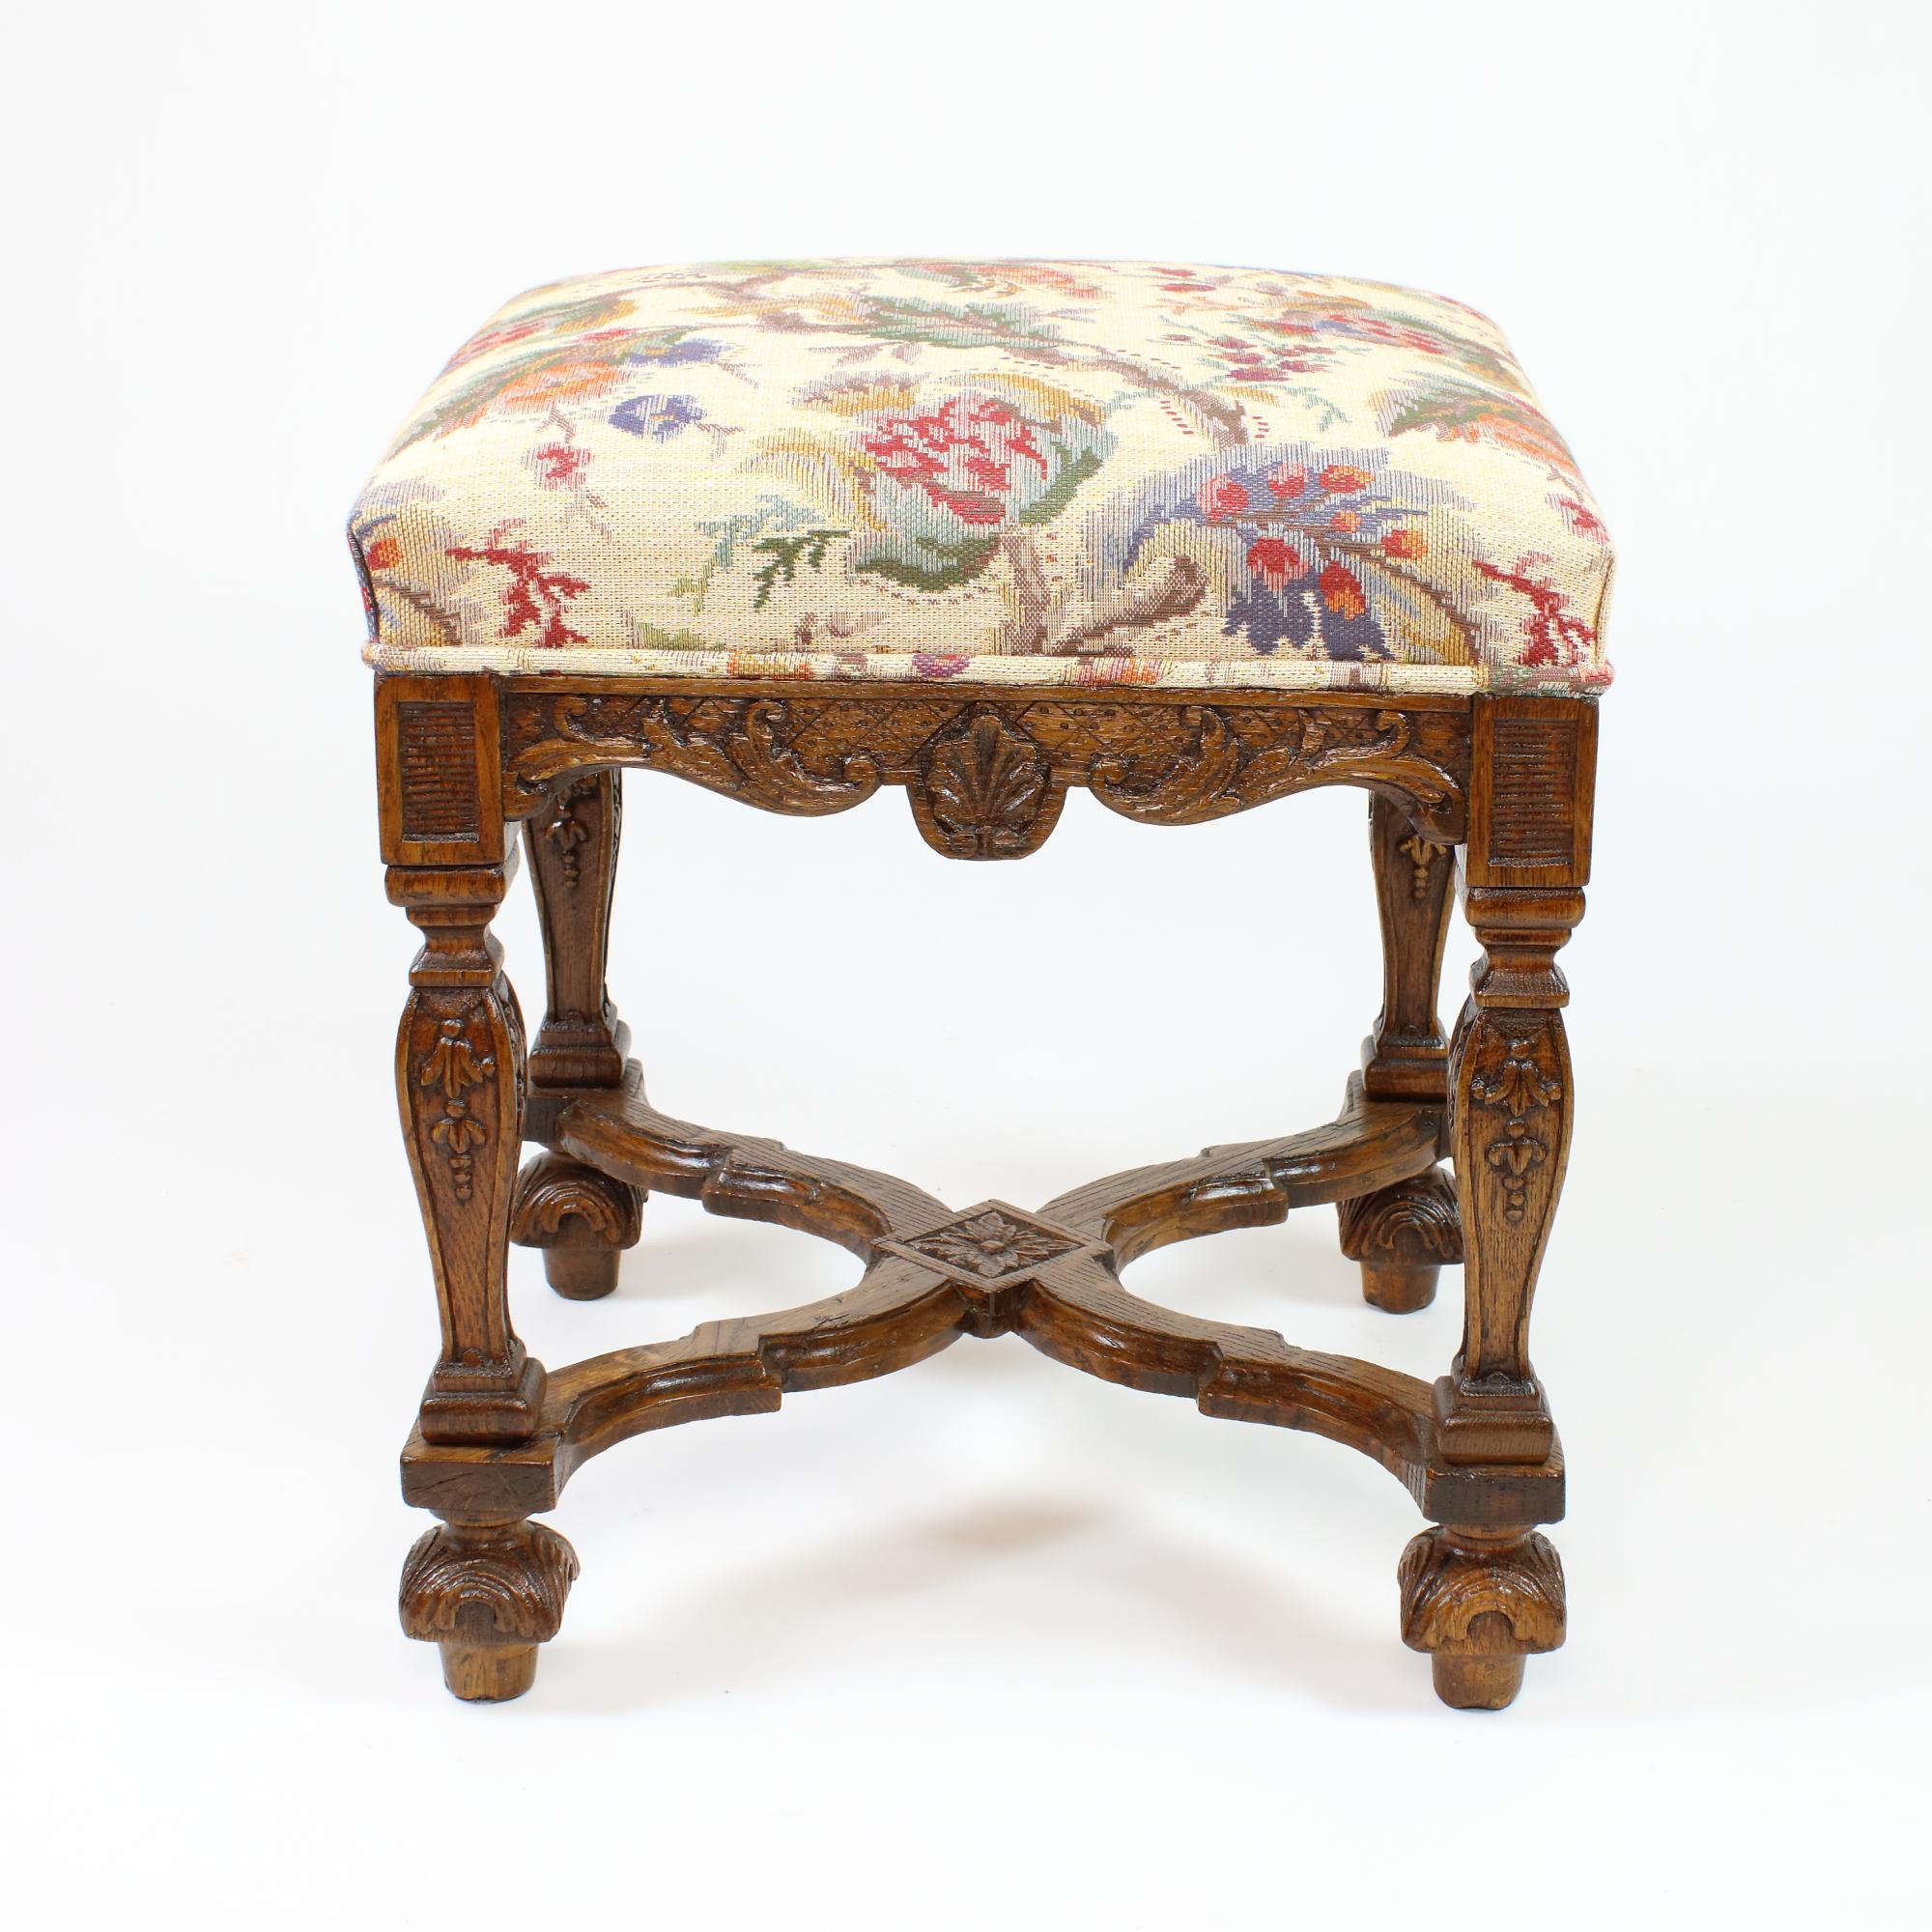 Early 18th Century French Louis XIV/Régence Carved Oak Stool or Tabouret In Good Condition For Sale In Berlin, DE